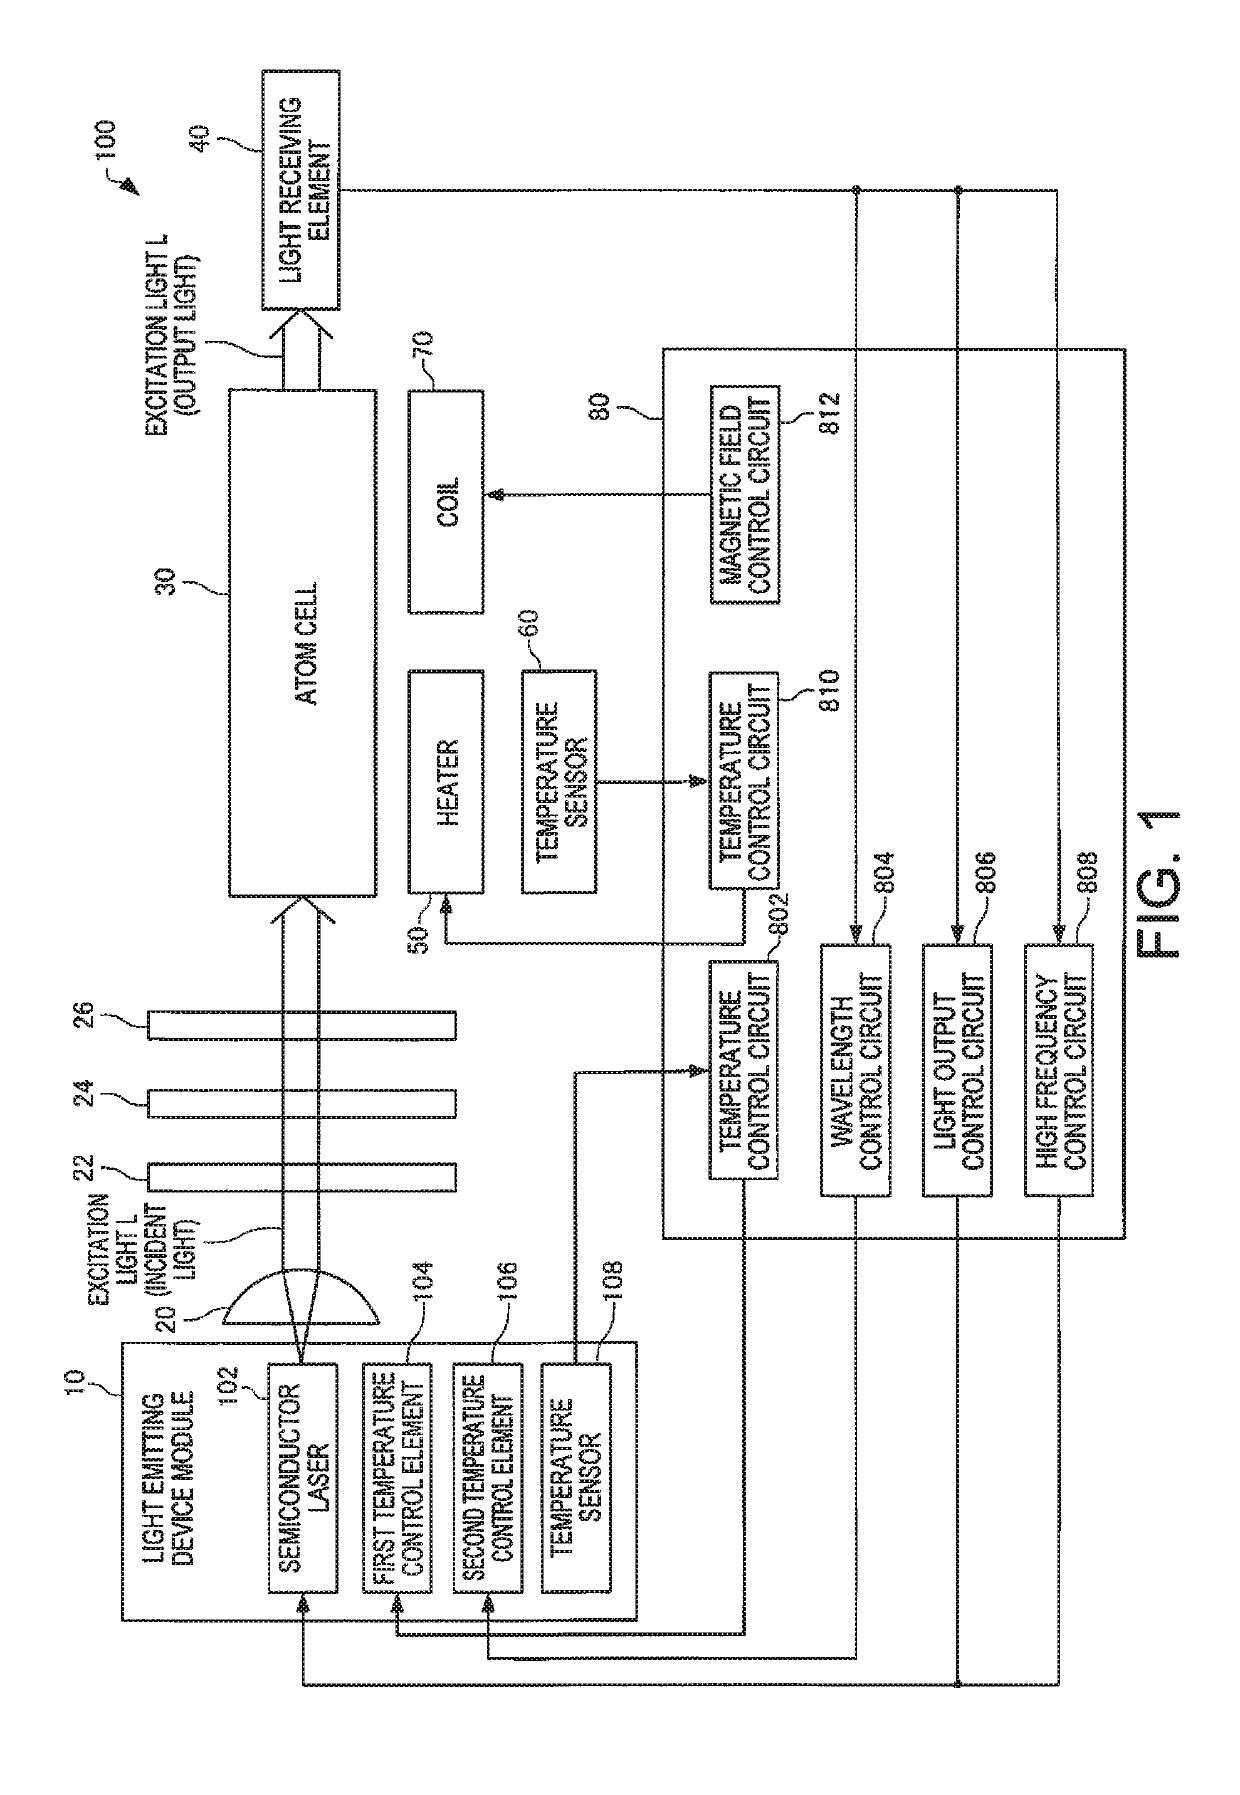 Atomic oscillator and frequency signal generation system